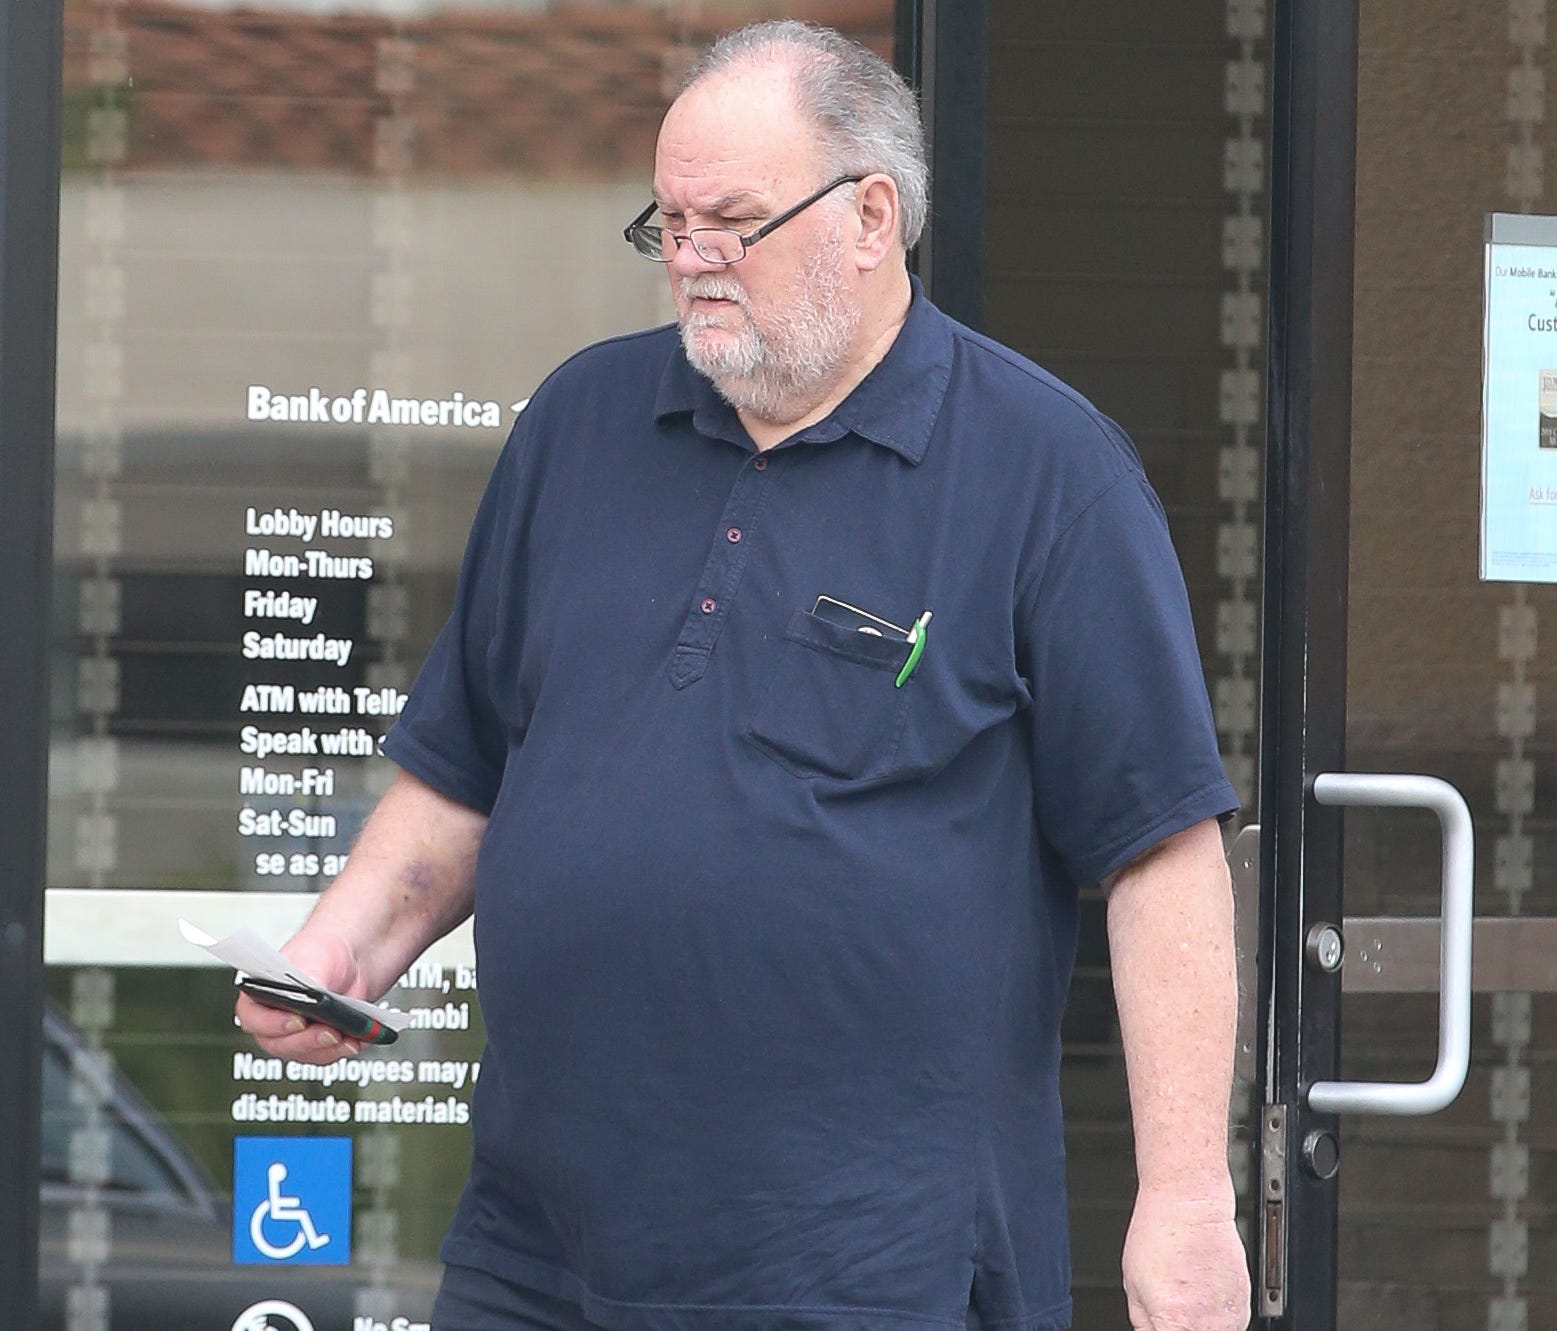 Meghan Markle's dad Thomas Markle heads out to tie up loose ends and runs errands before the Royal Wedding. Markle visited a bank, post office and a pharmacy in L.A.